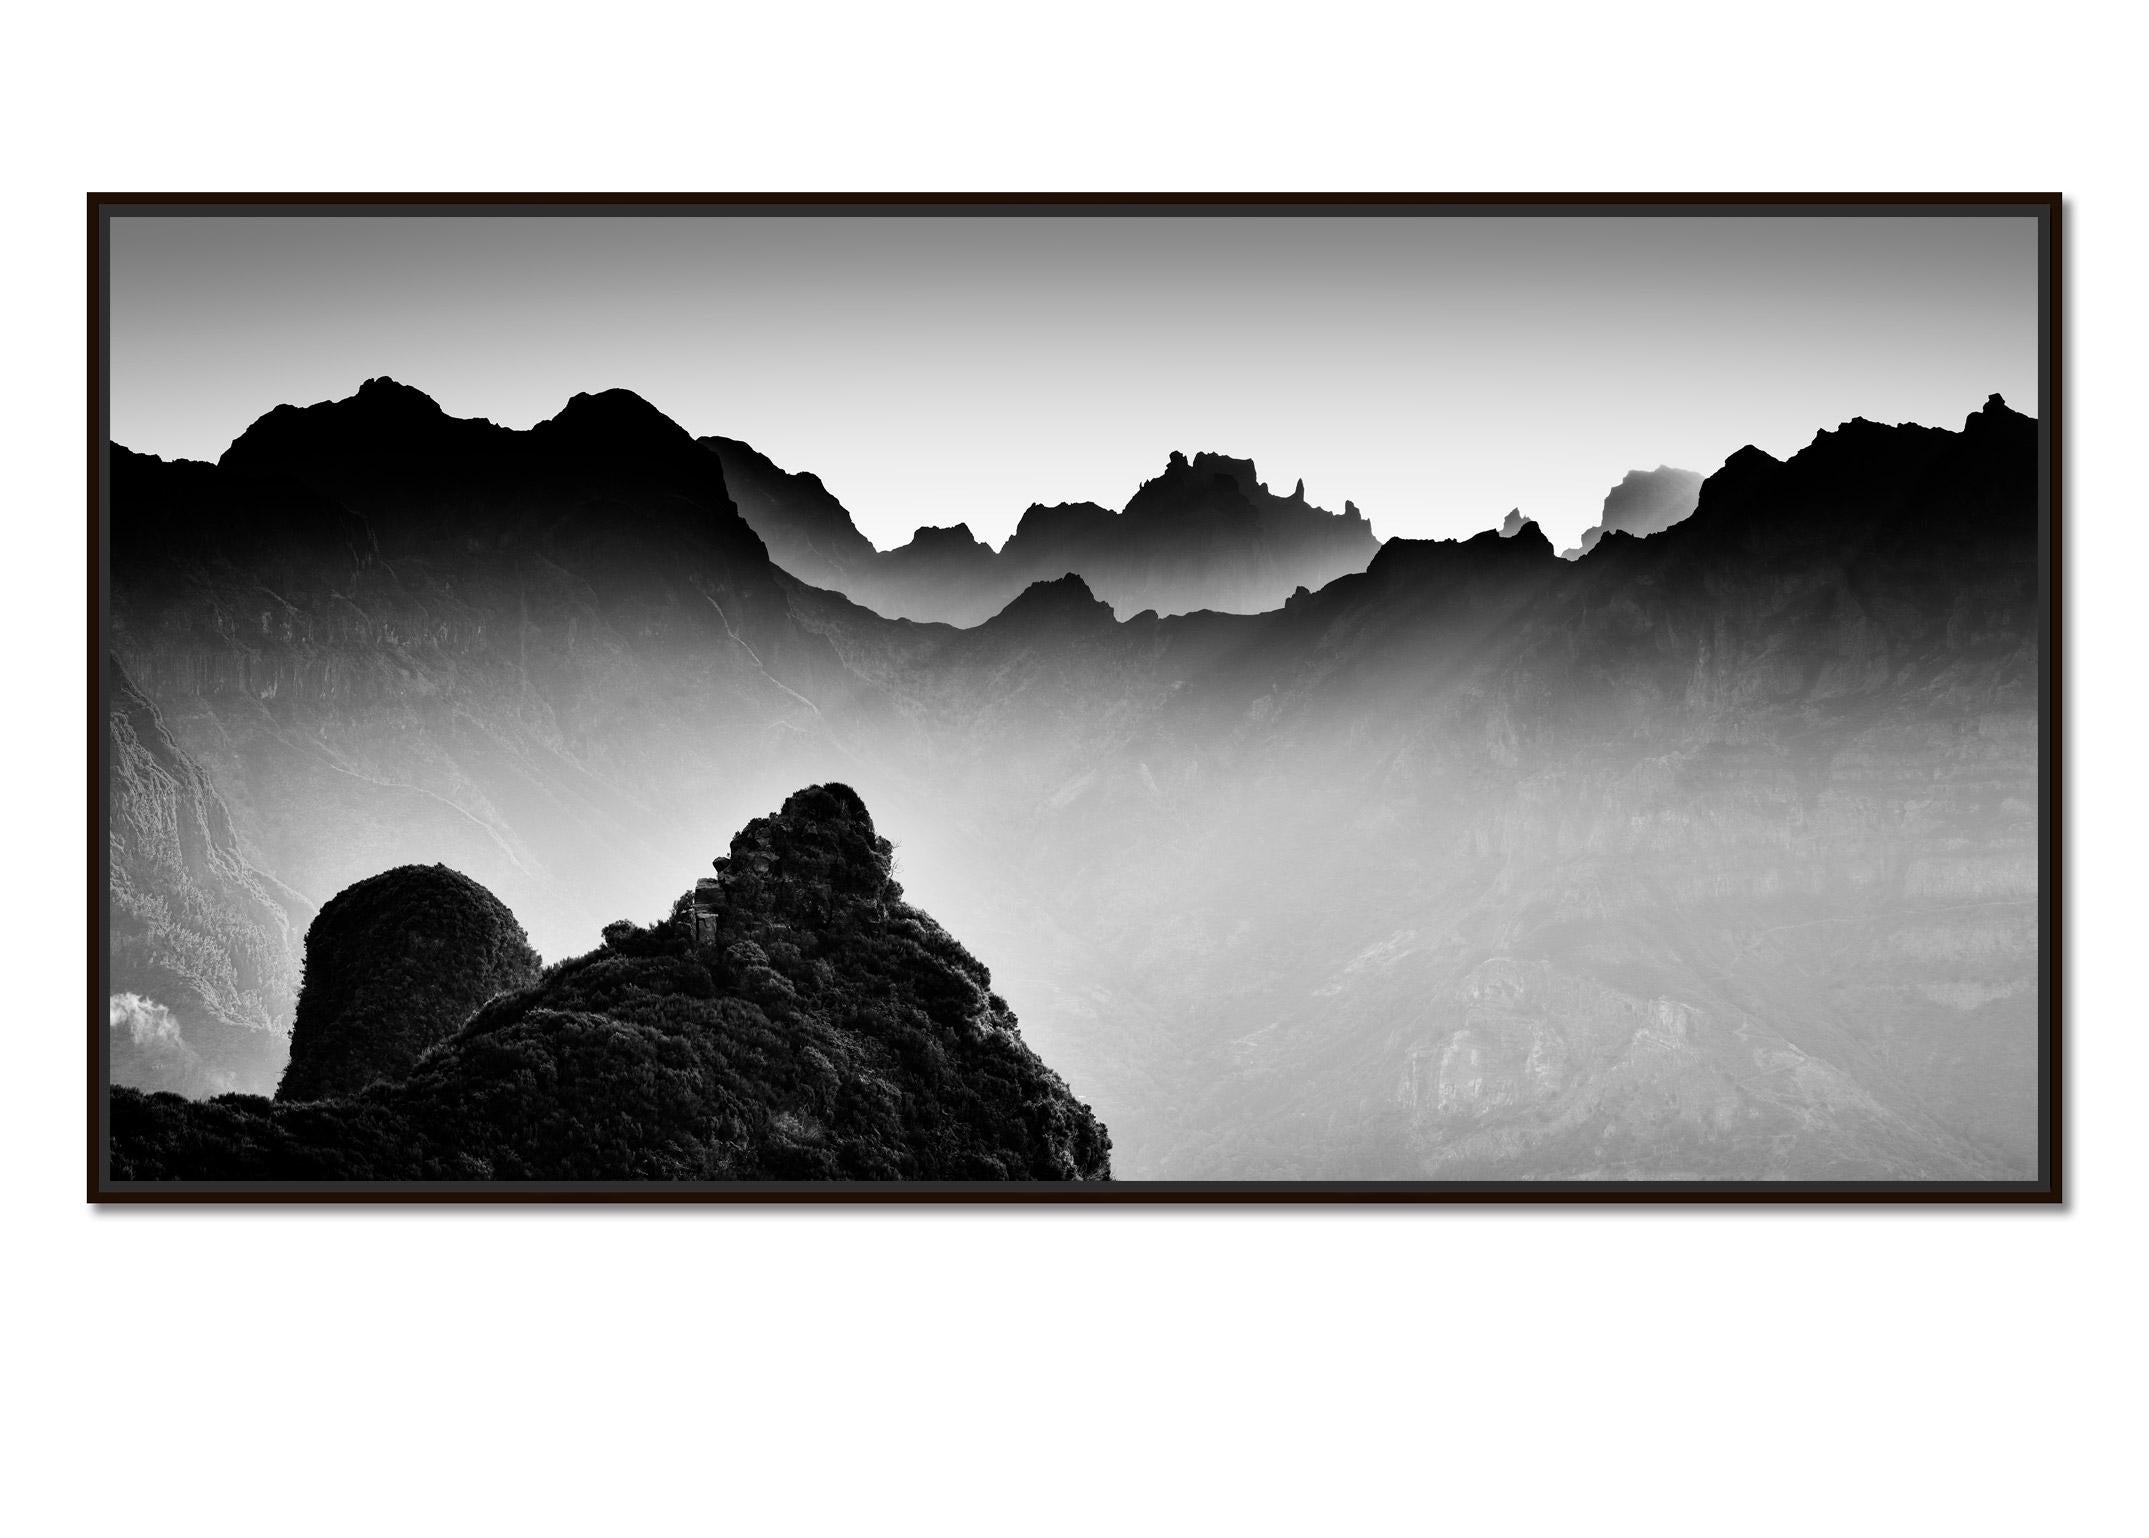 Morning Light in the Mountains, Madeira, black and white photography, landscape - Photograph by Gerald Berghammer